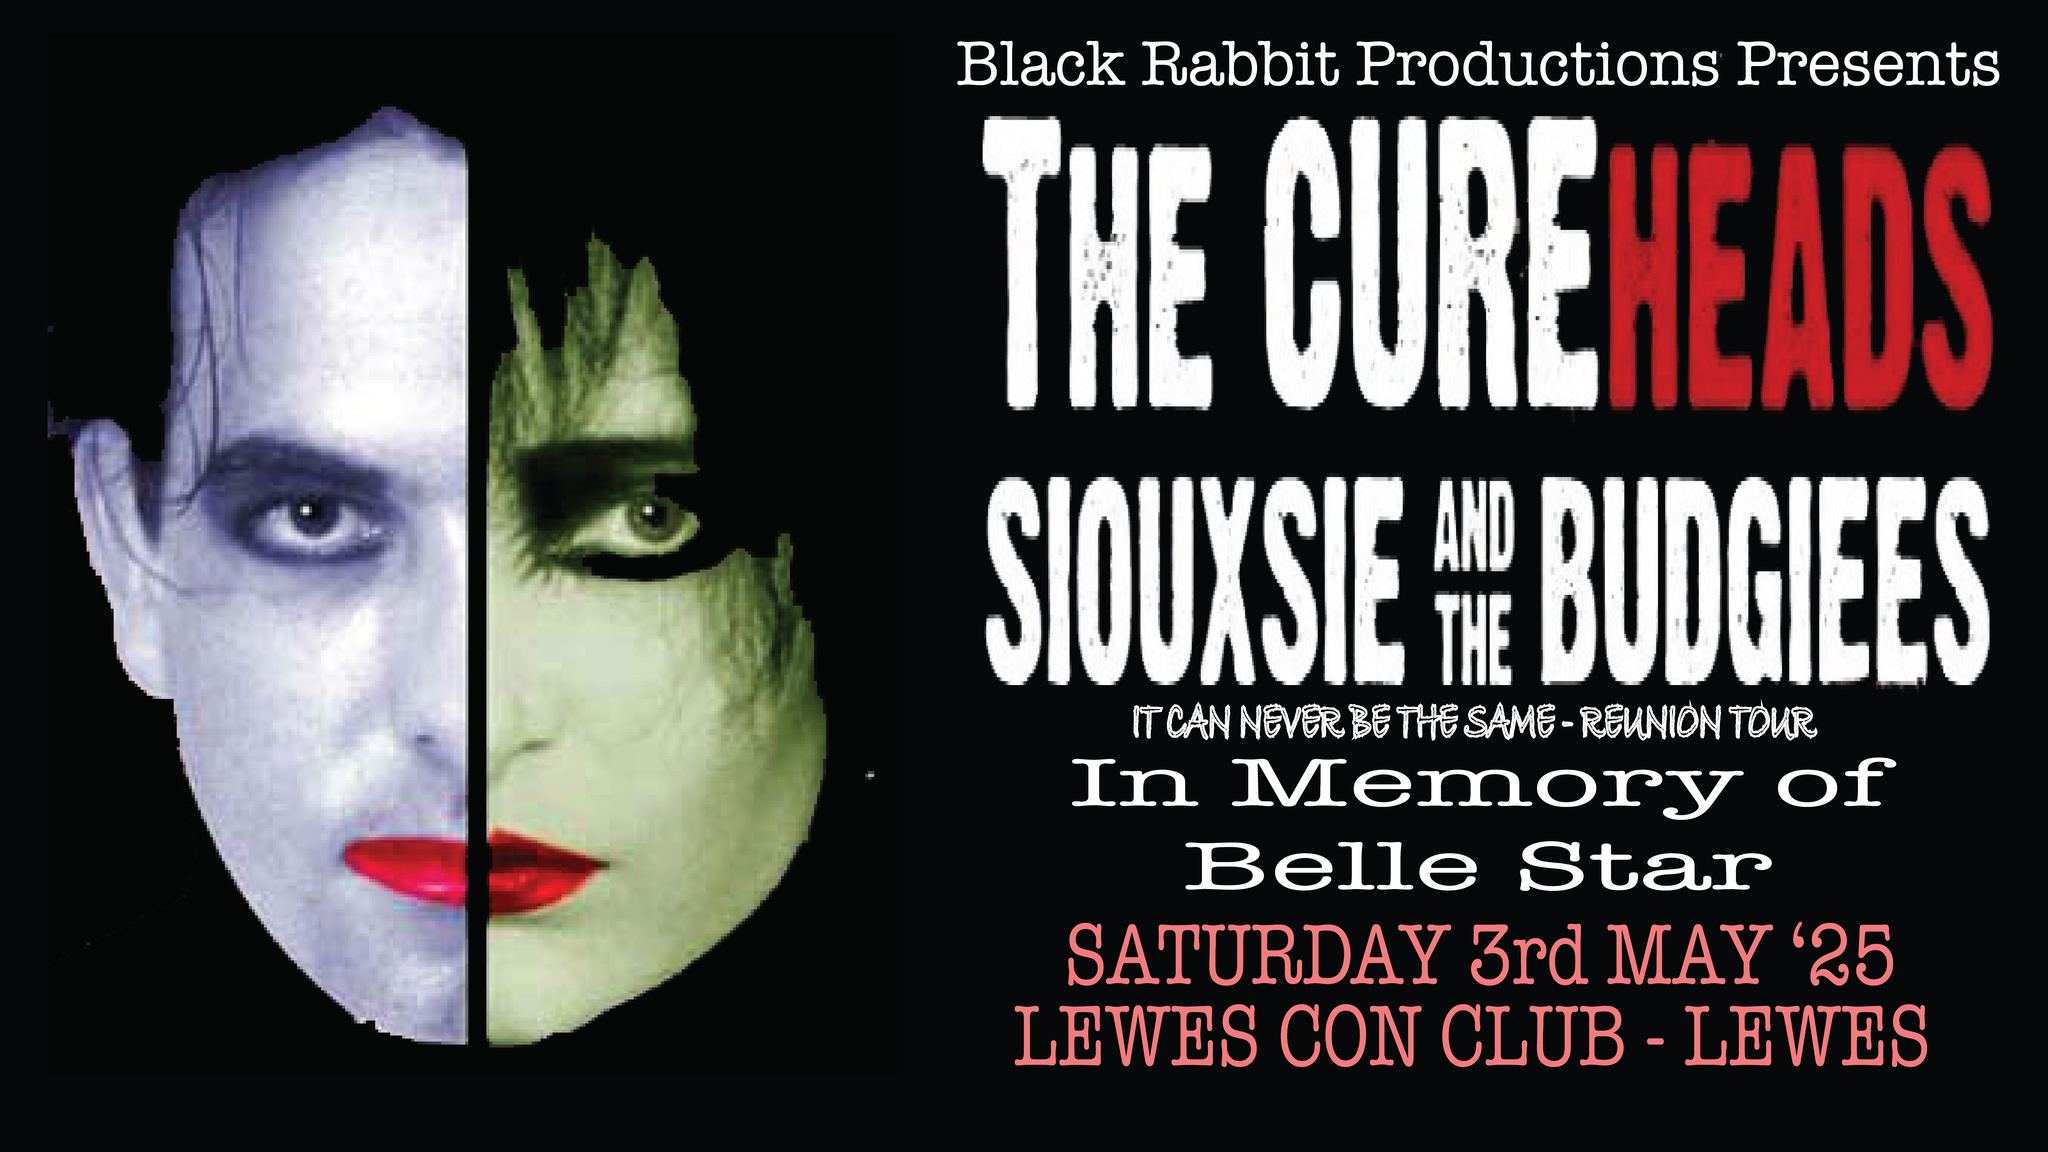 The CureHeads + Siouxie & the Budgiees